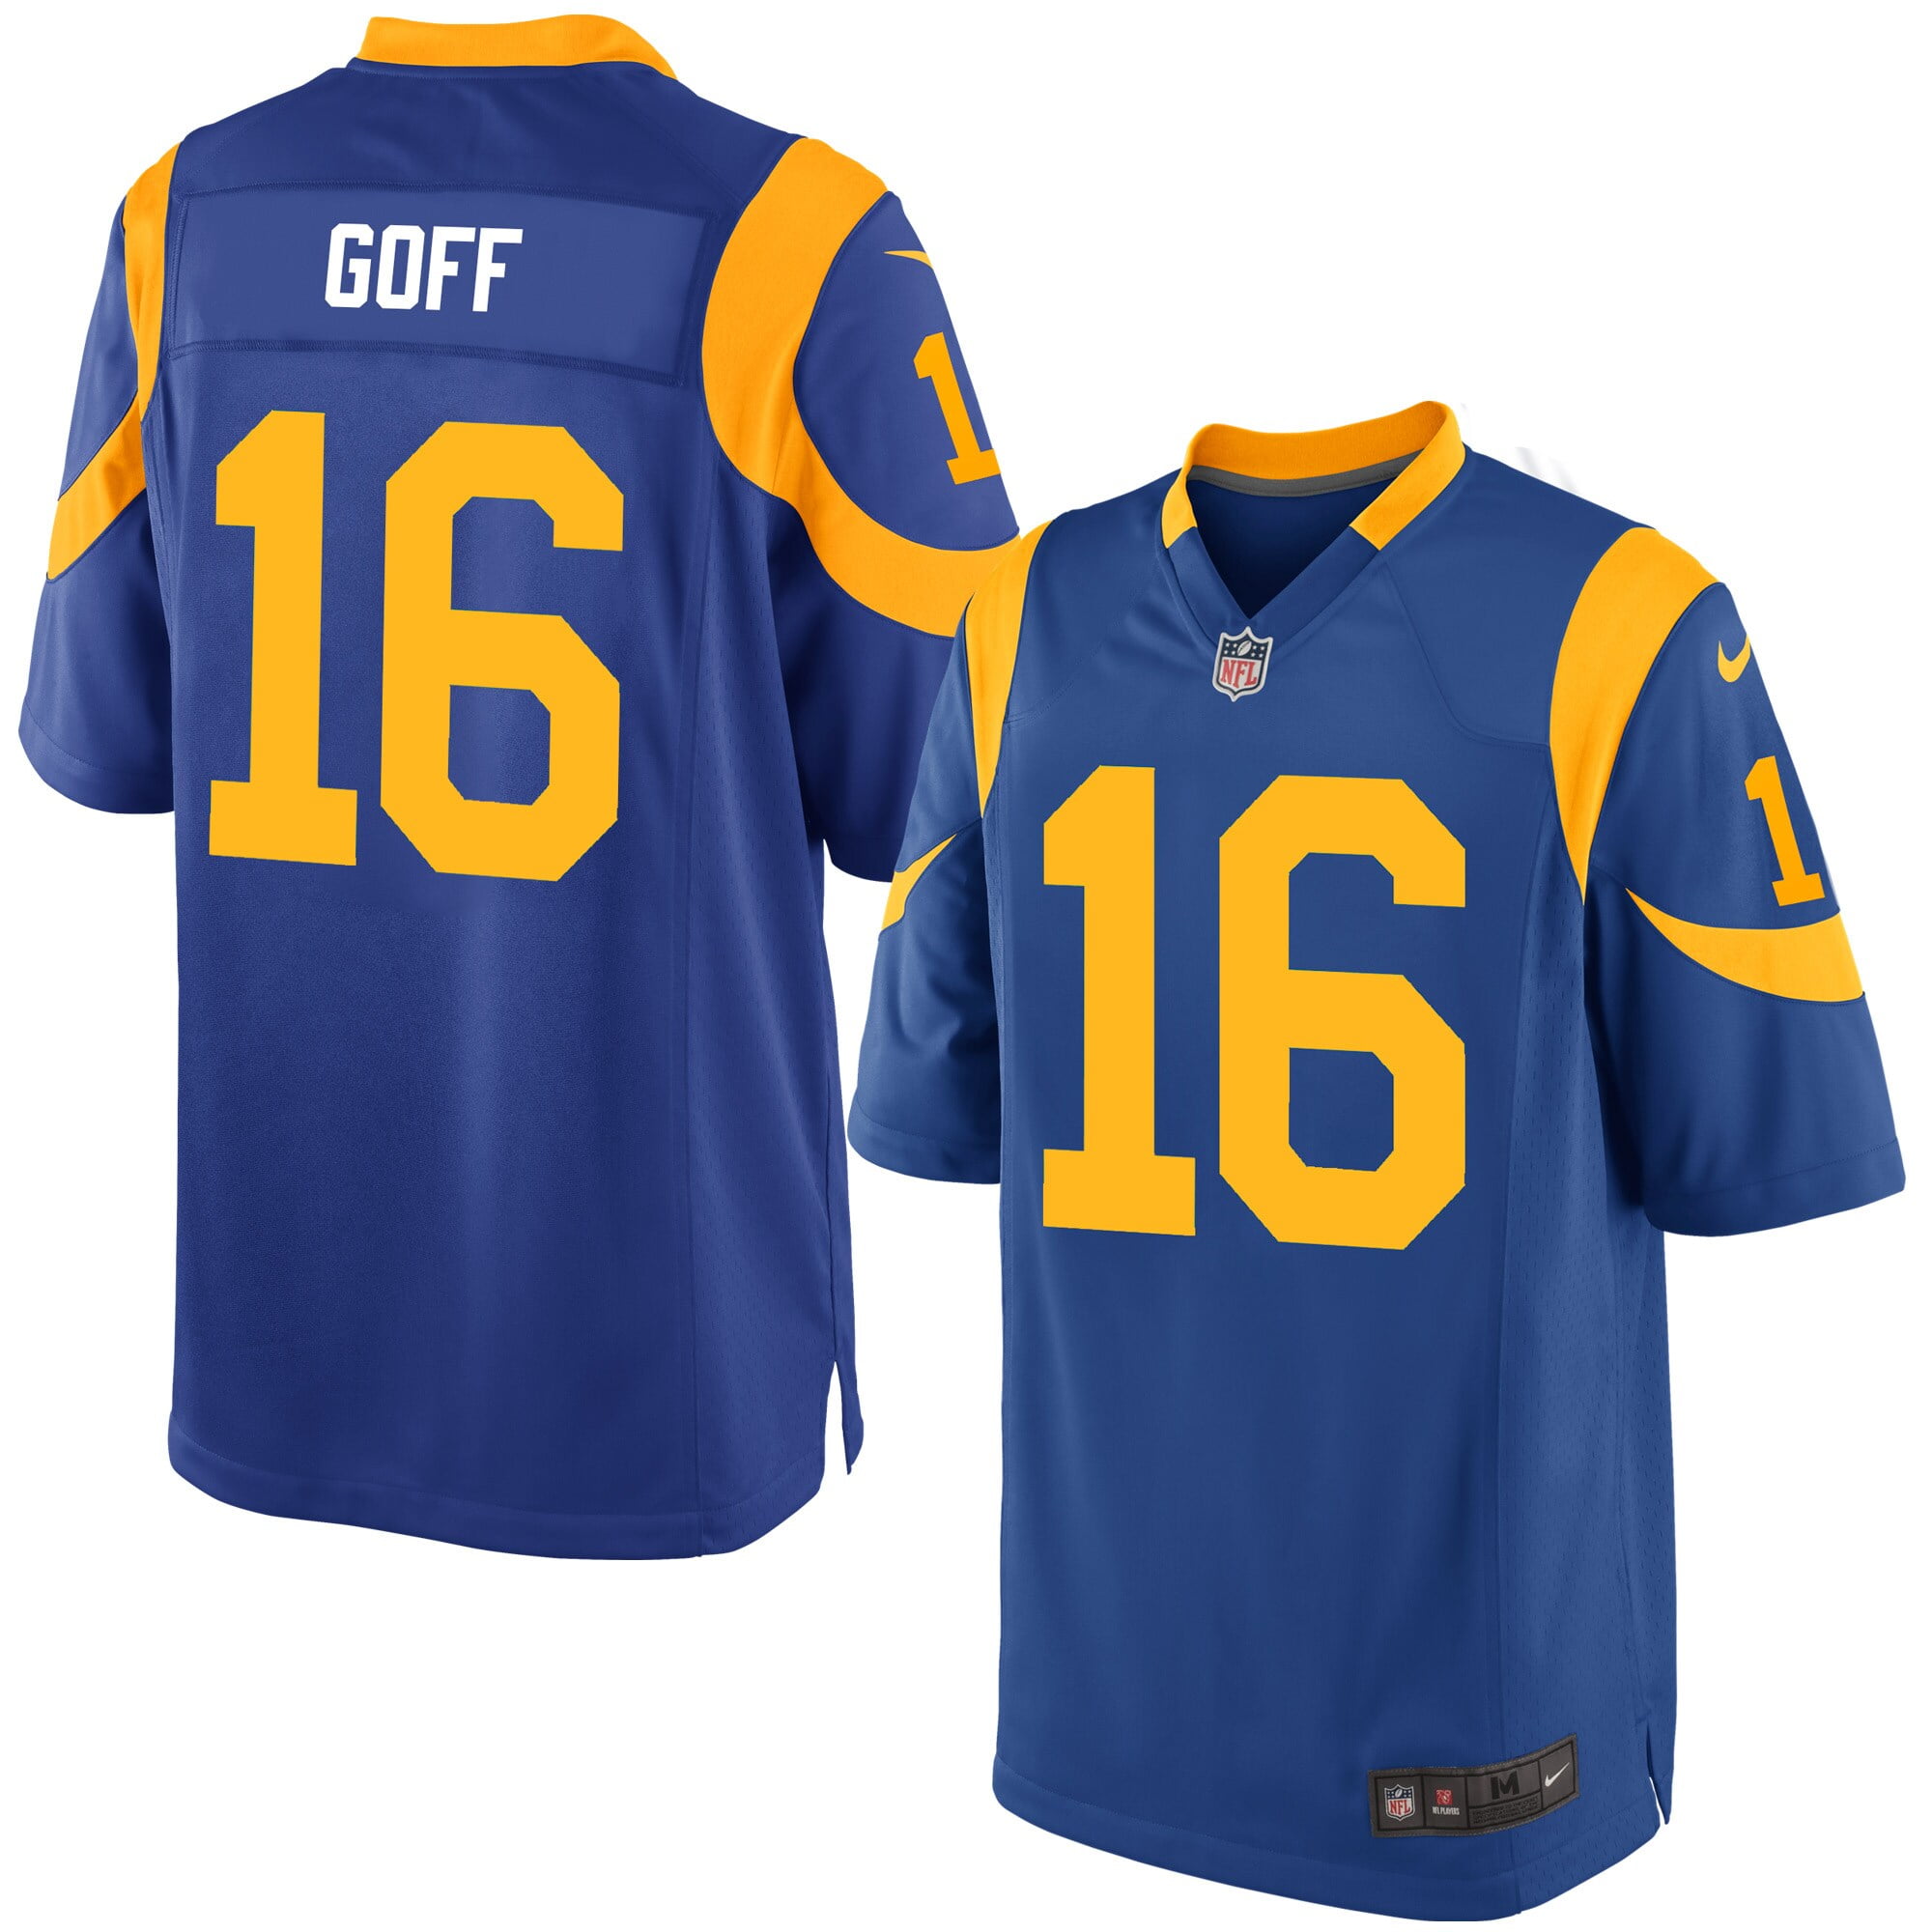 youth rams jersey